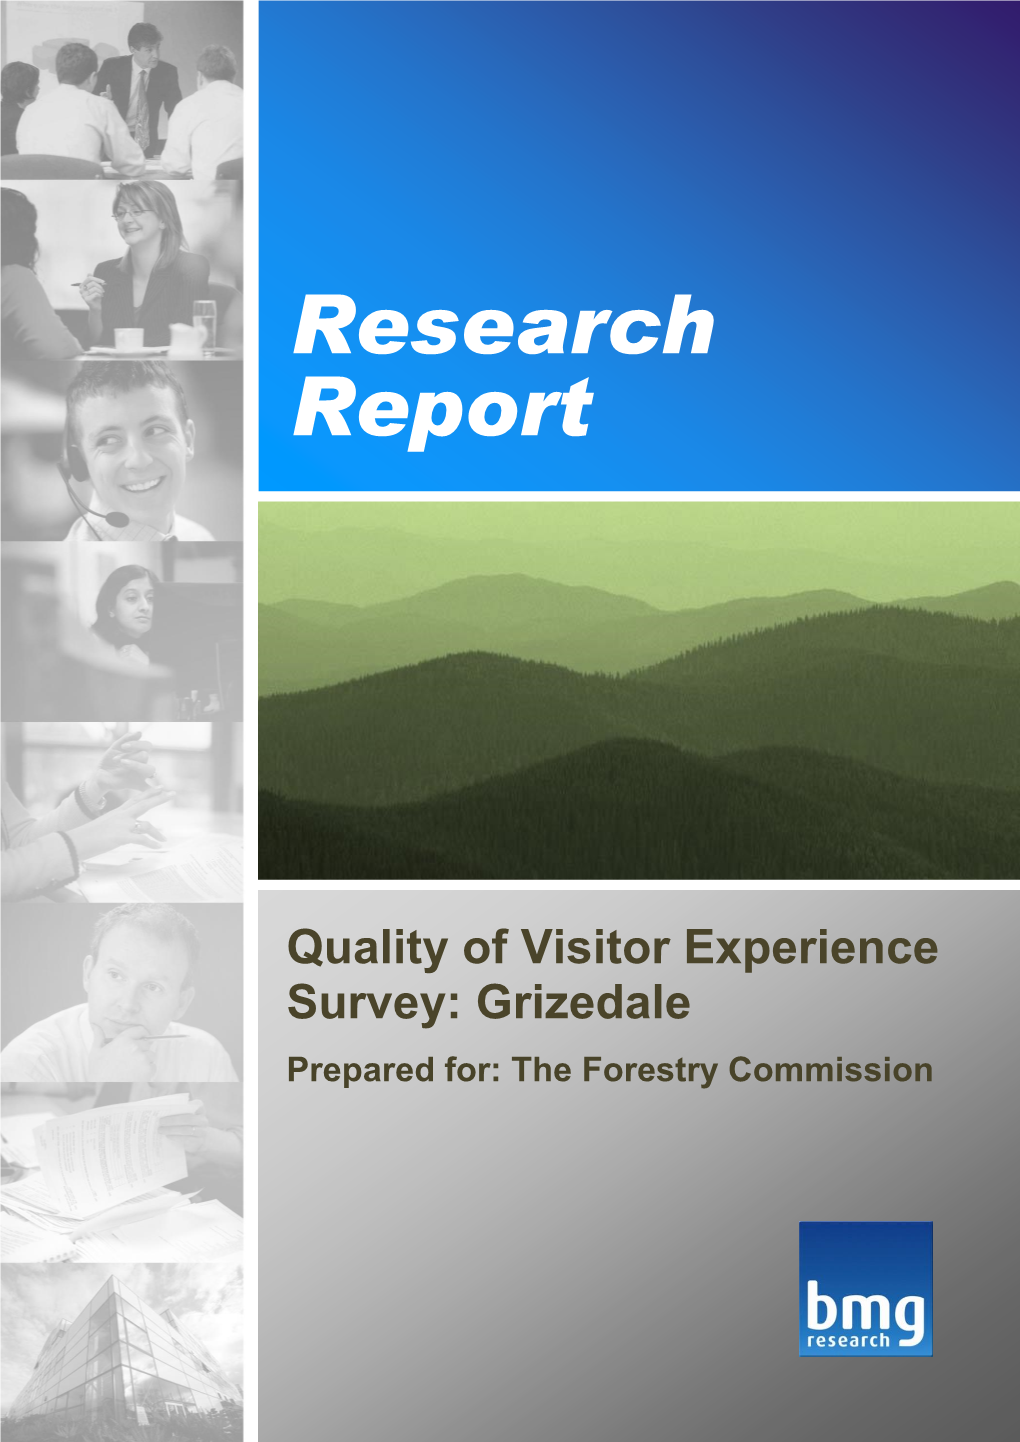 Quality of Visitor Experience Survey: Grizedale